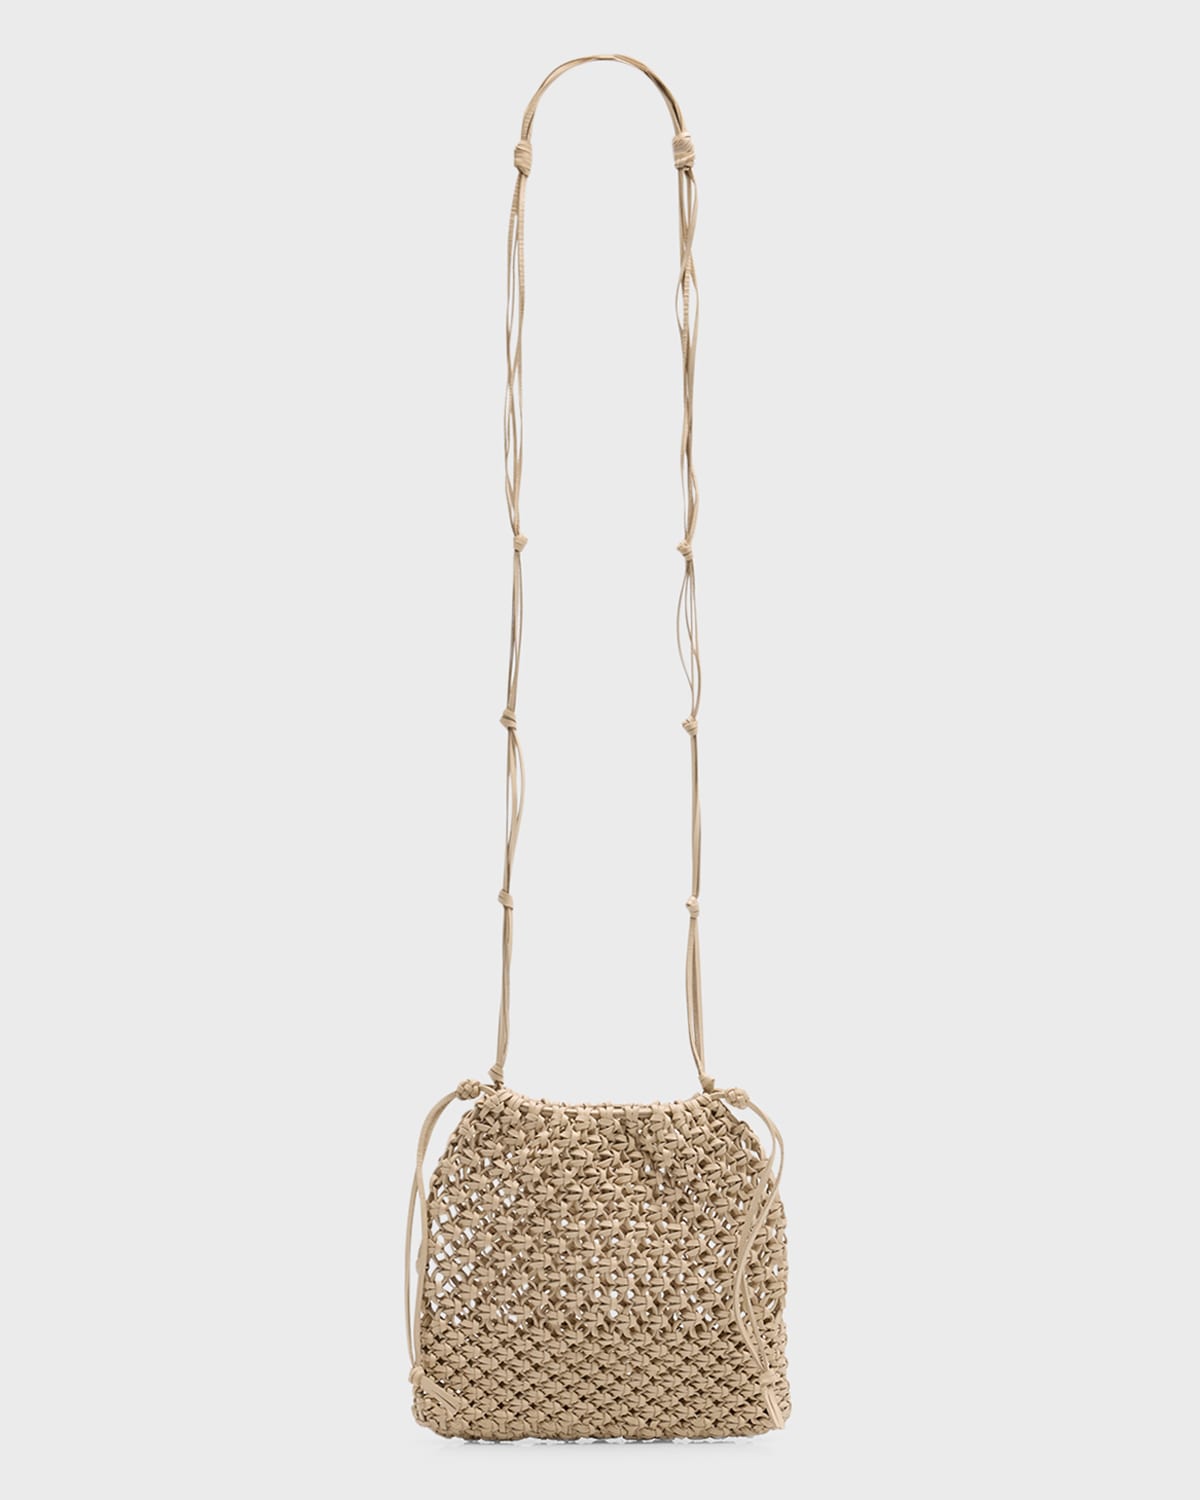 Ulla Johnson Tulia Knotted Leather Crossbody Bag In Brown